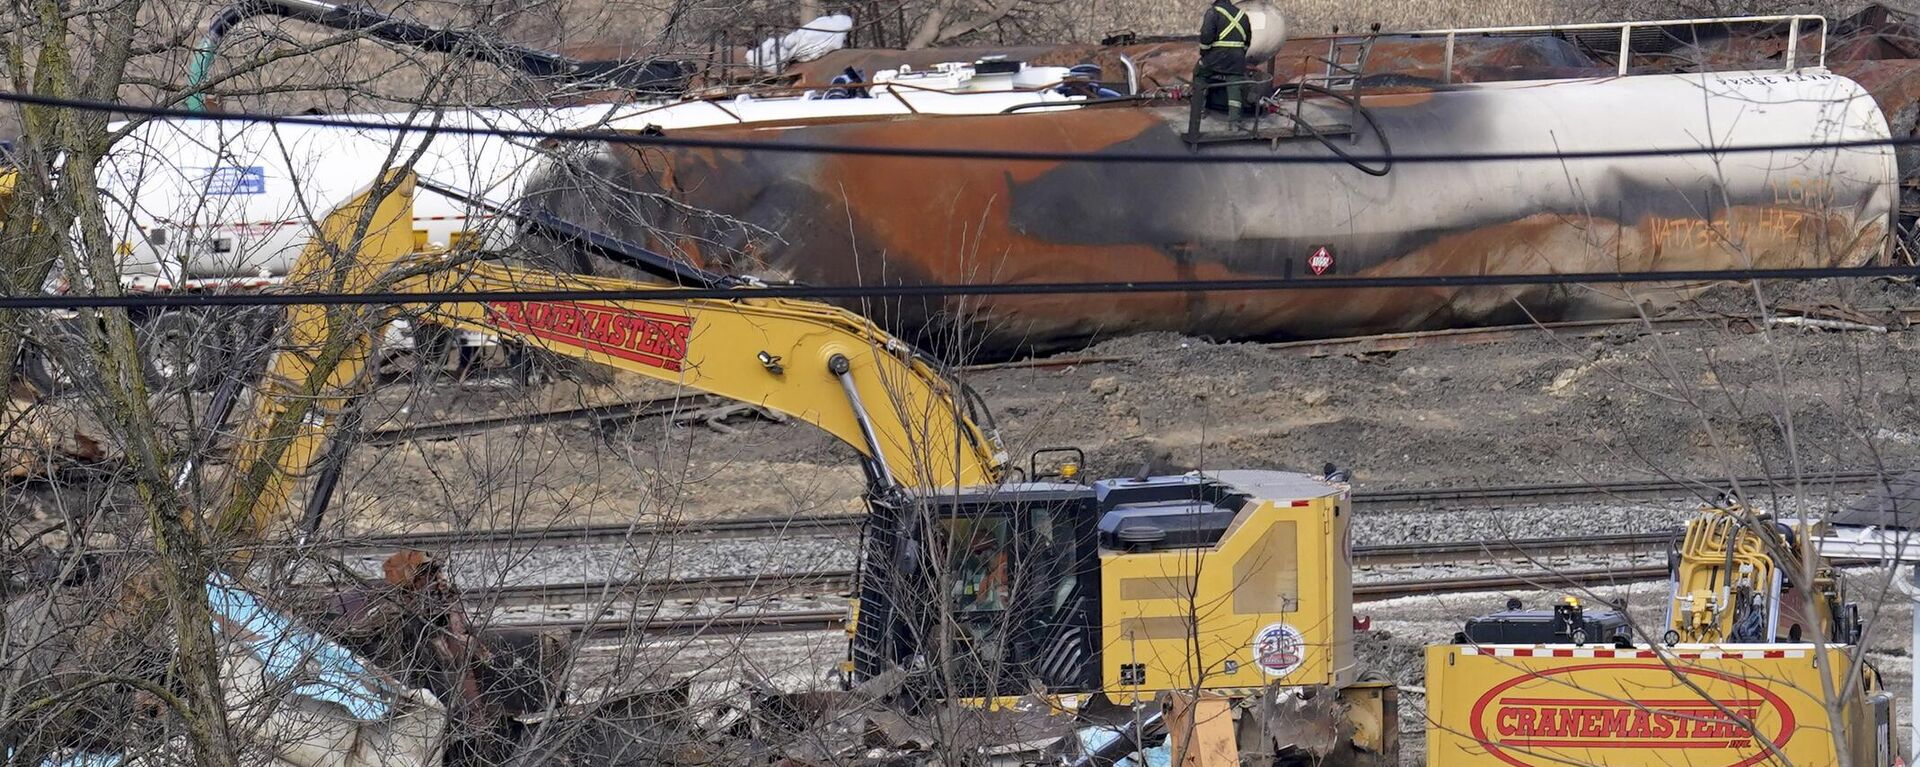 Workers continue to clean up remaining tank cars, Tuesday, Feb. 21, 2023, in East Palestine, Ohio, following the Feb. 3 Norfolk Southern freight train derailment. - Sputnik International, 1920, 23.02.2023